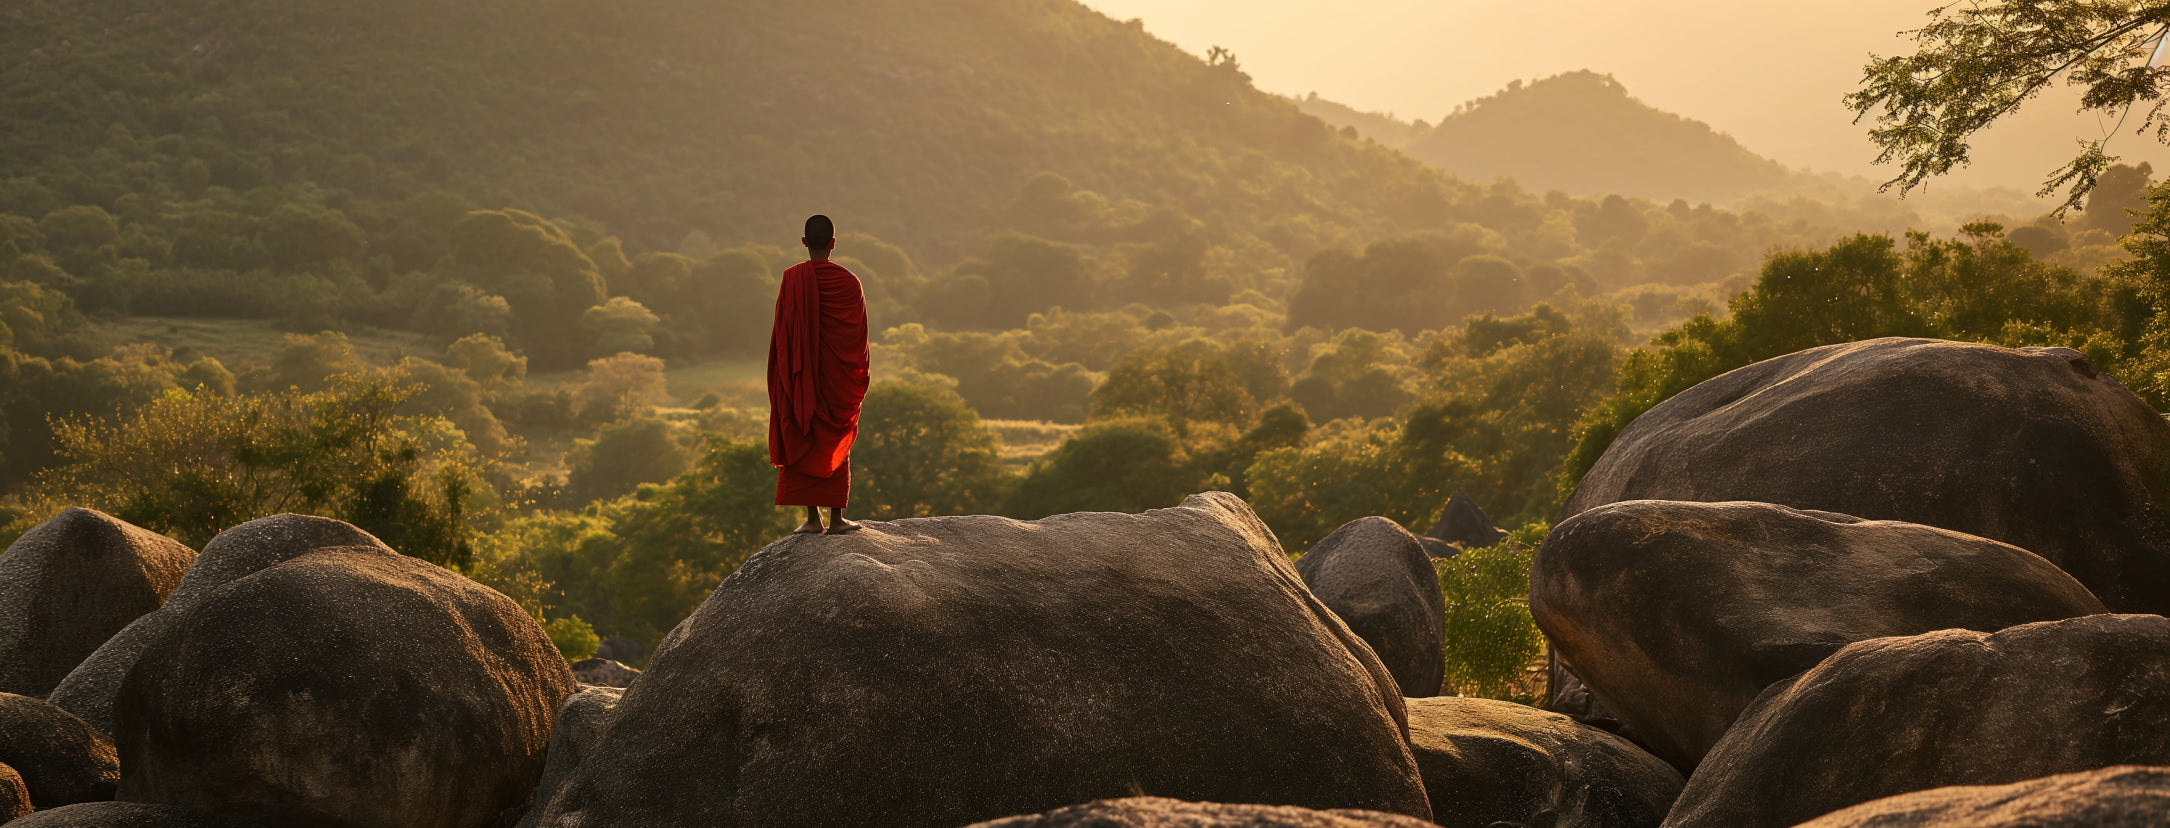 A monk in vibrant red robes stands atop a boulder in a serene, mountainous landscape. The warm golden light of the setting sun bathes the scene, highlighting the rounded shapes of the rocks and the lush greenery in the distance. The monk gazes into the distance, embodying a moment of peaceful contemplation.